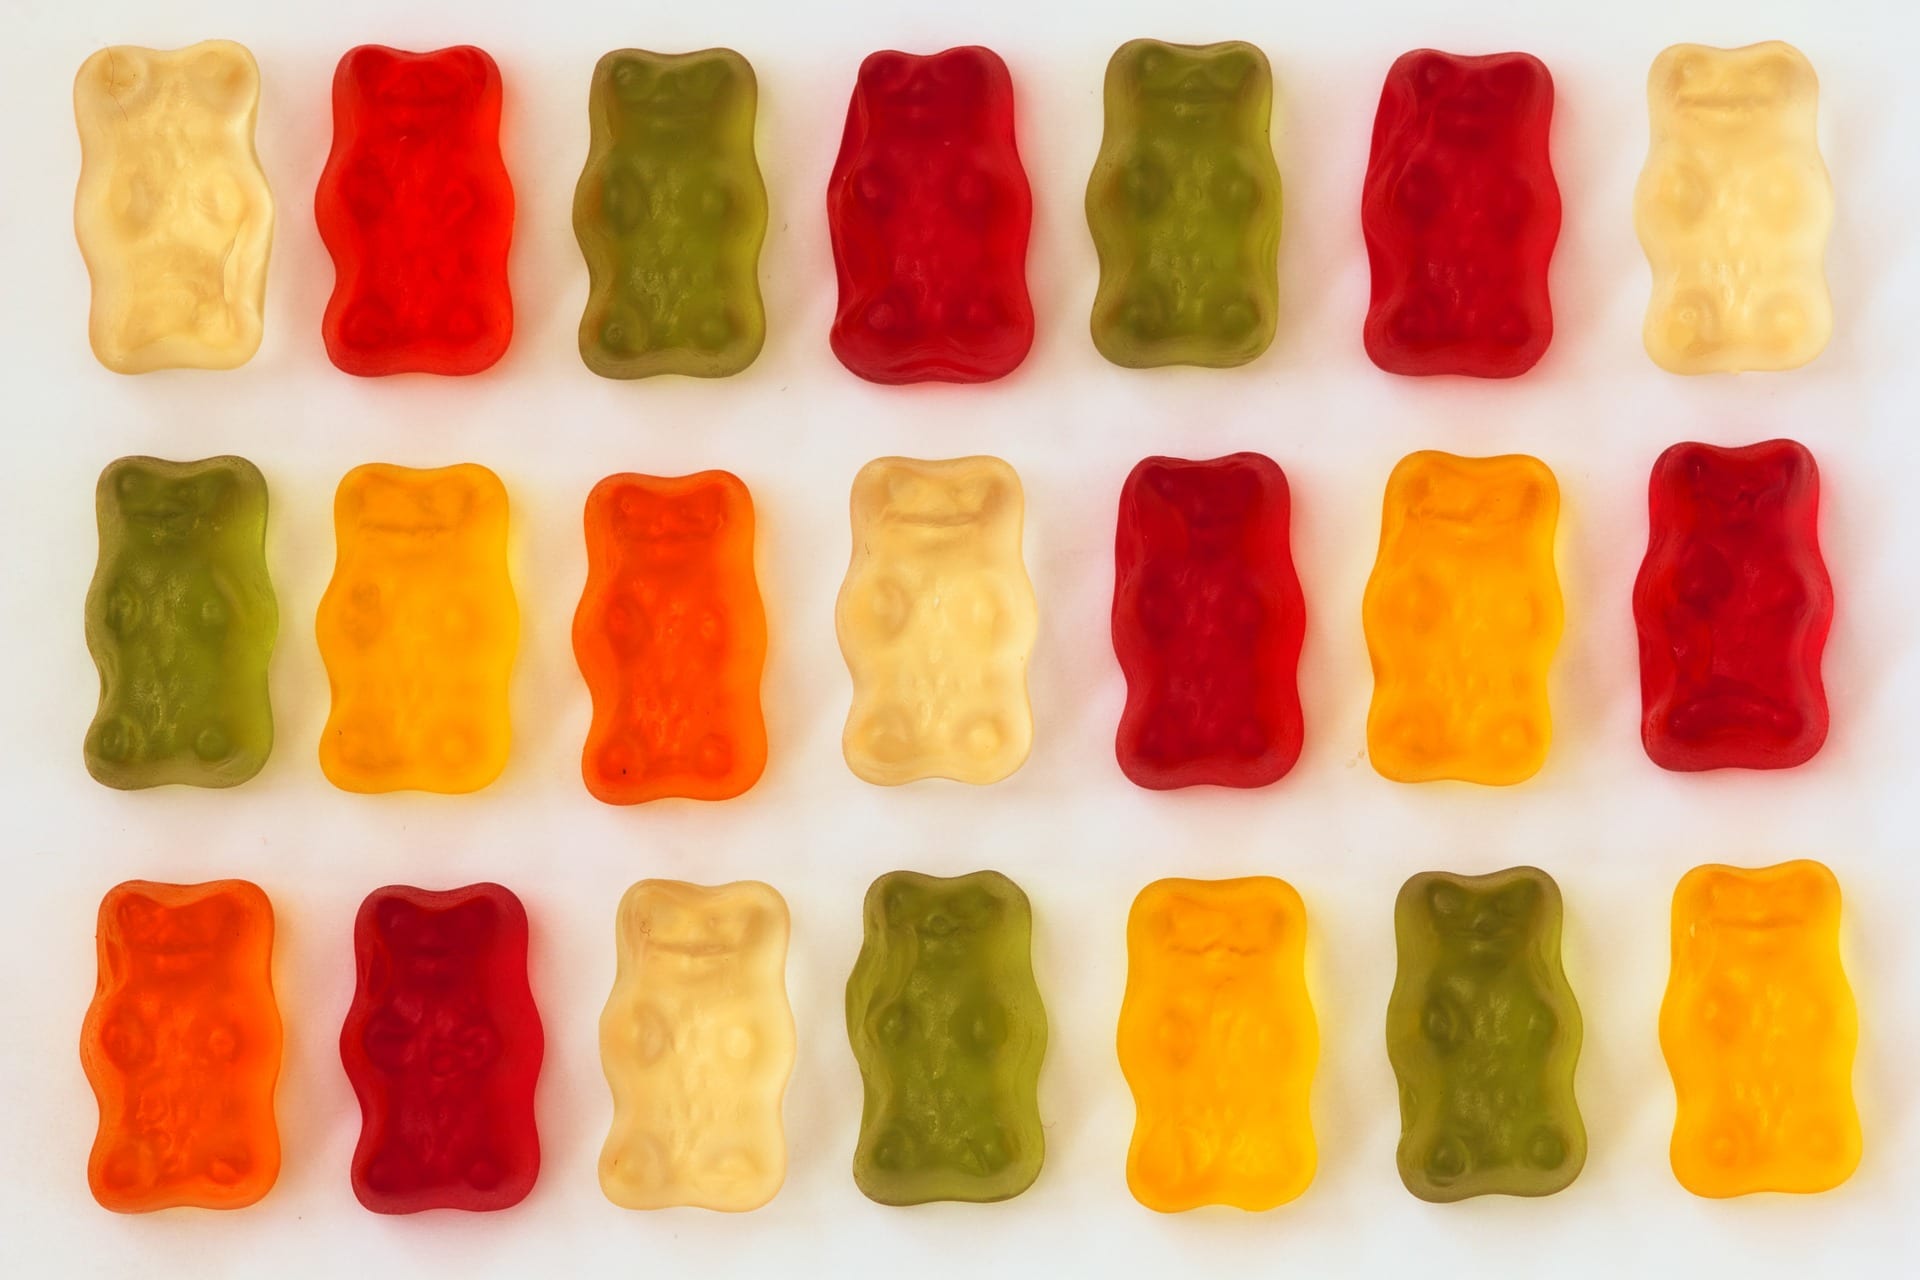 CBD in food products: gummy sweets lined up in green, red, white and orange colours.